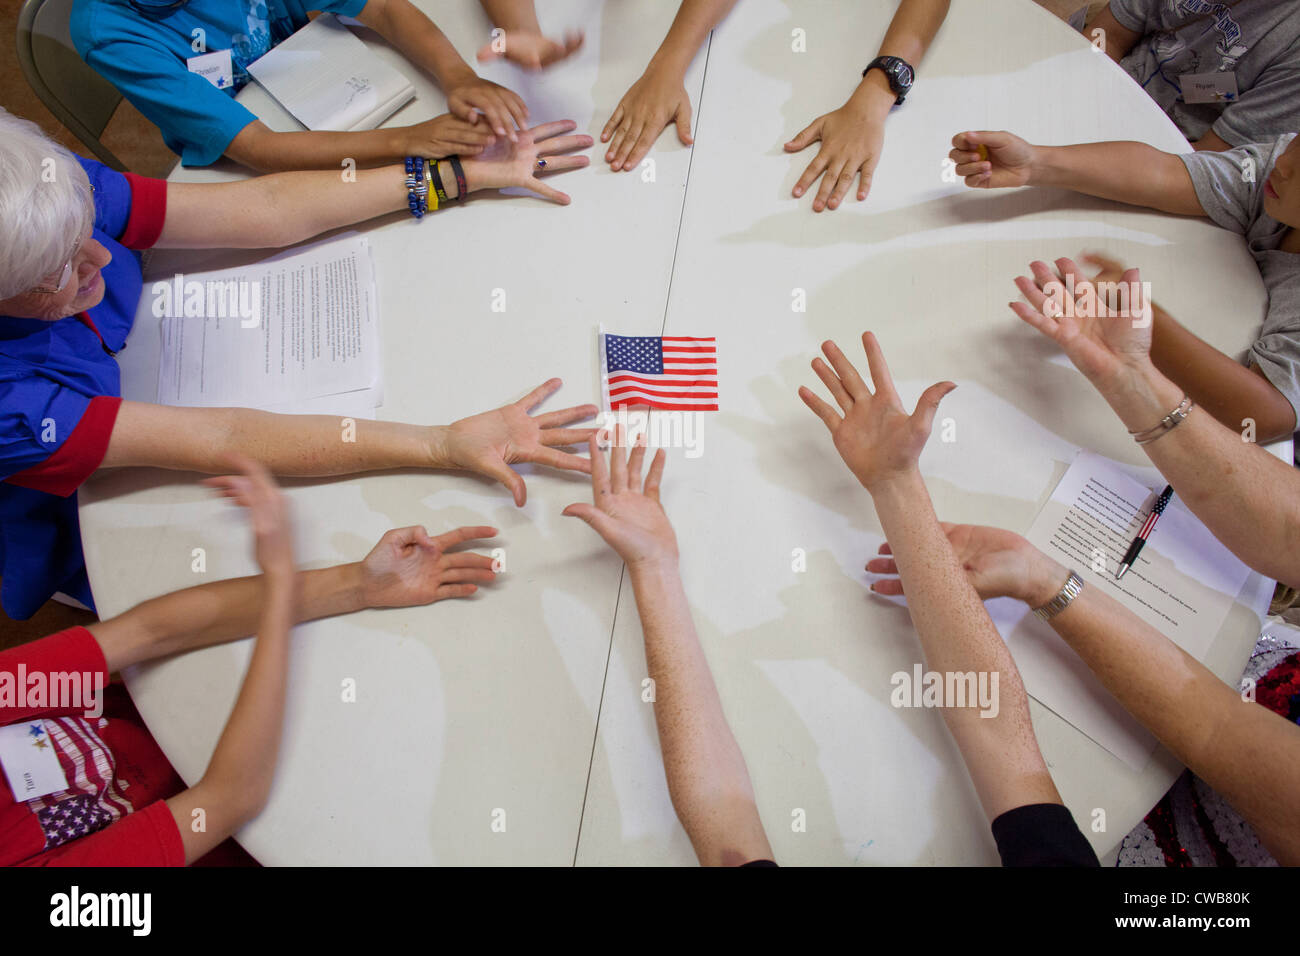 Students stretch hands toward center of table during lesson at 'Vacation Liberty School' session Stock Photo